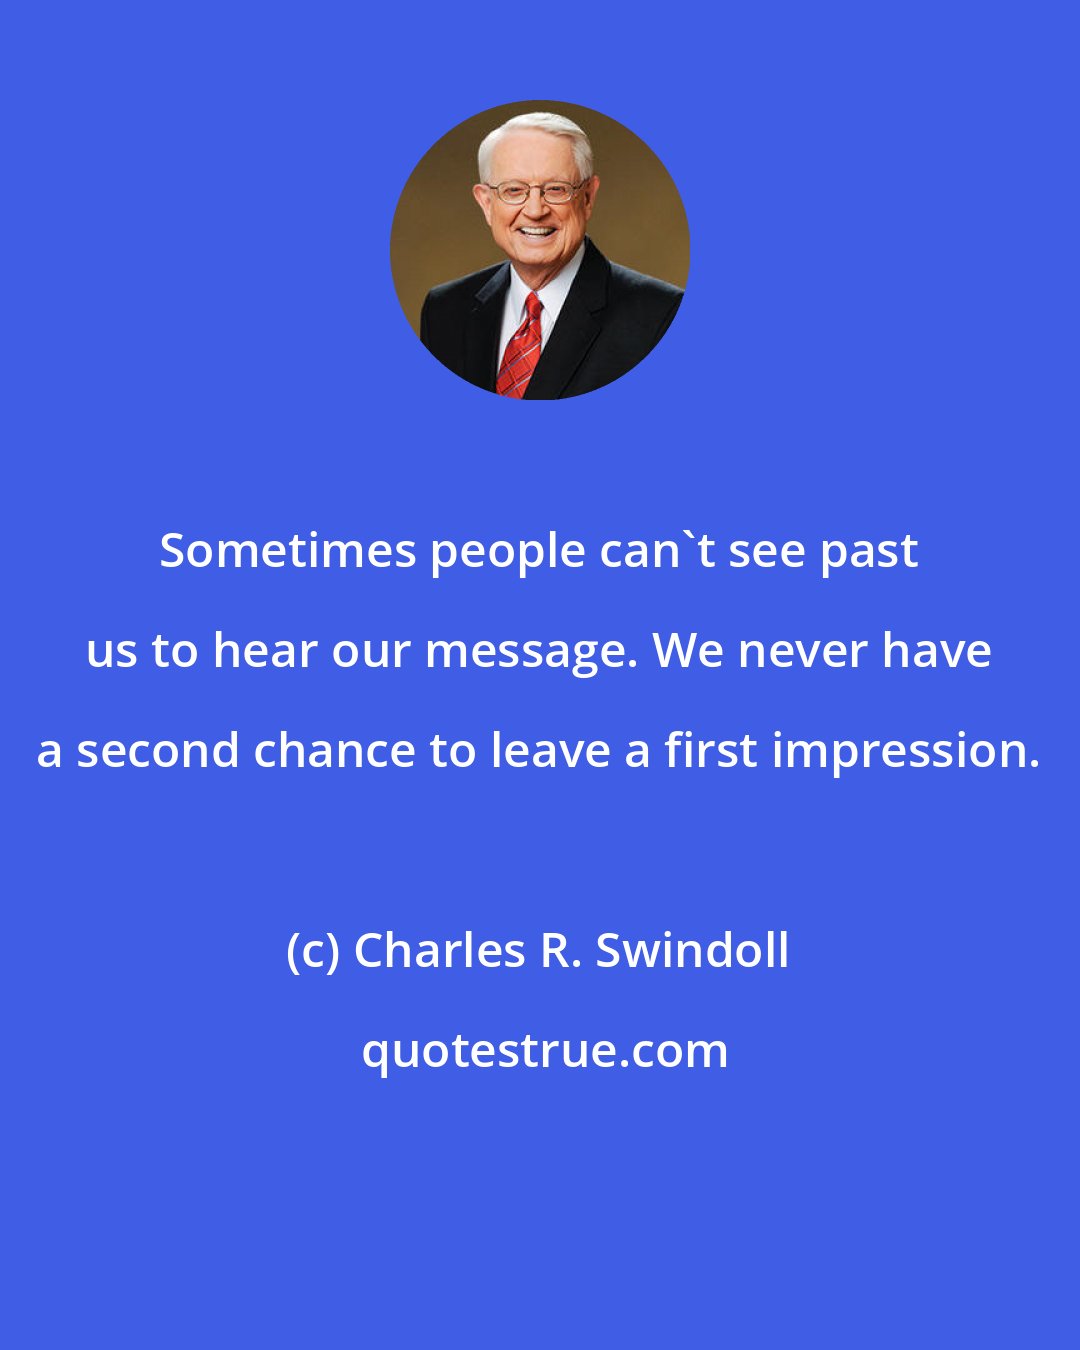 Charles R. Swindoll: Sometimes people can't see past us to hear our message. We never have a second chance to leave a first impression.